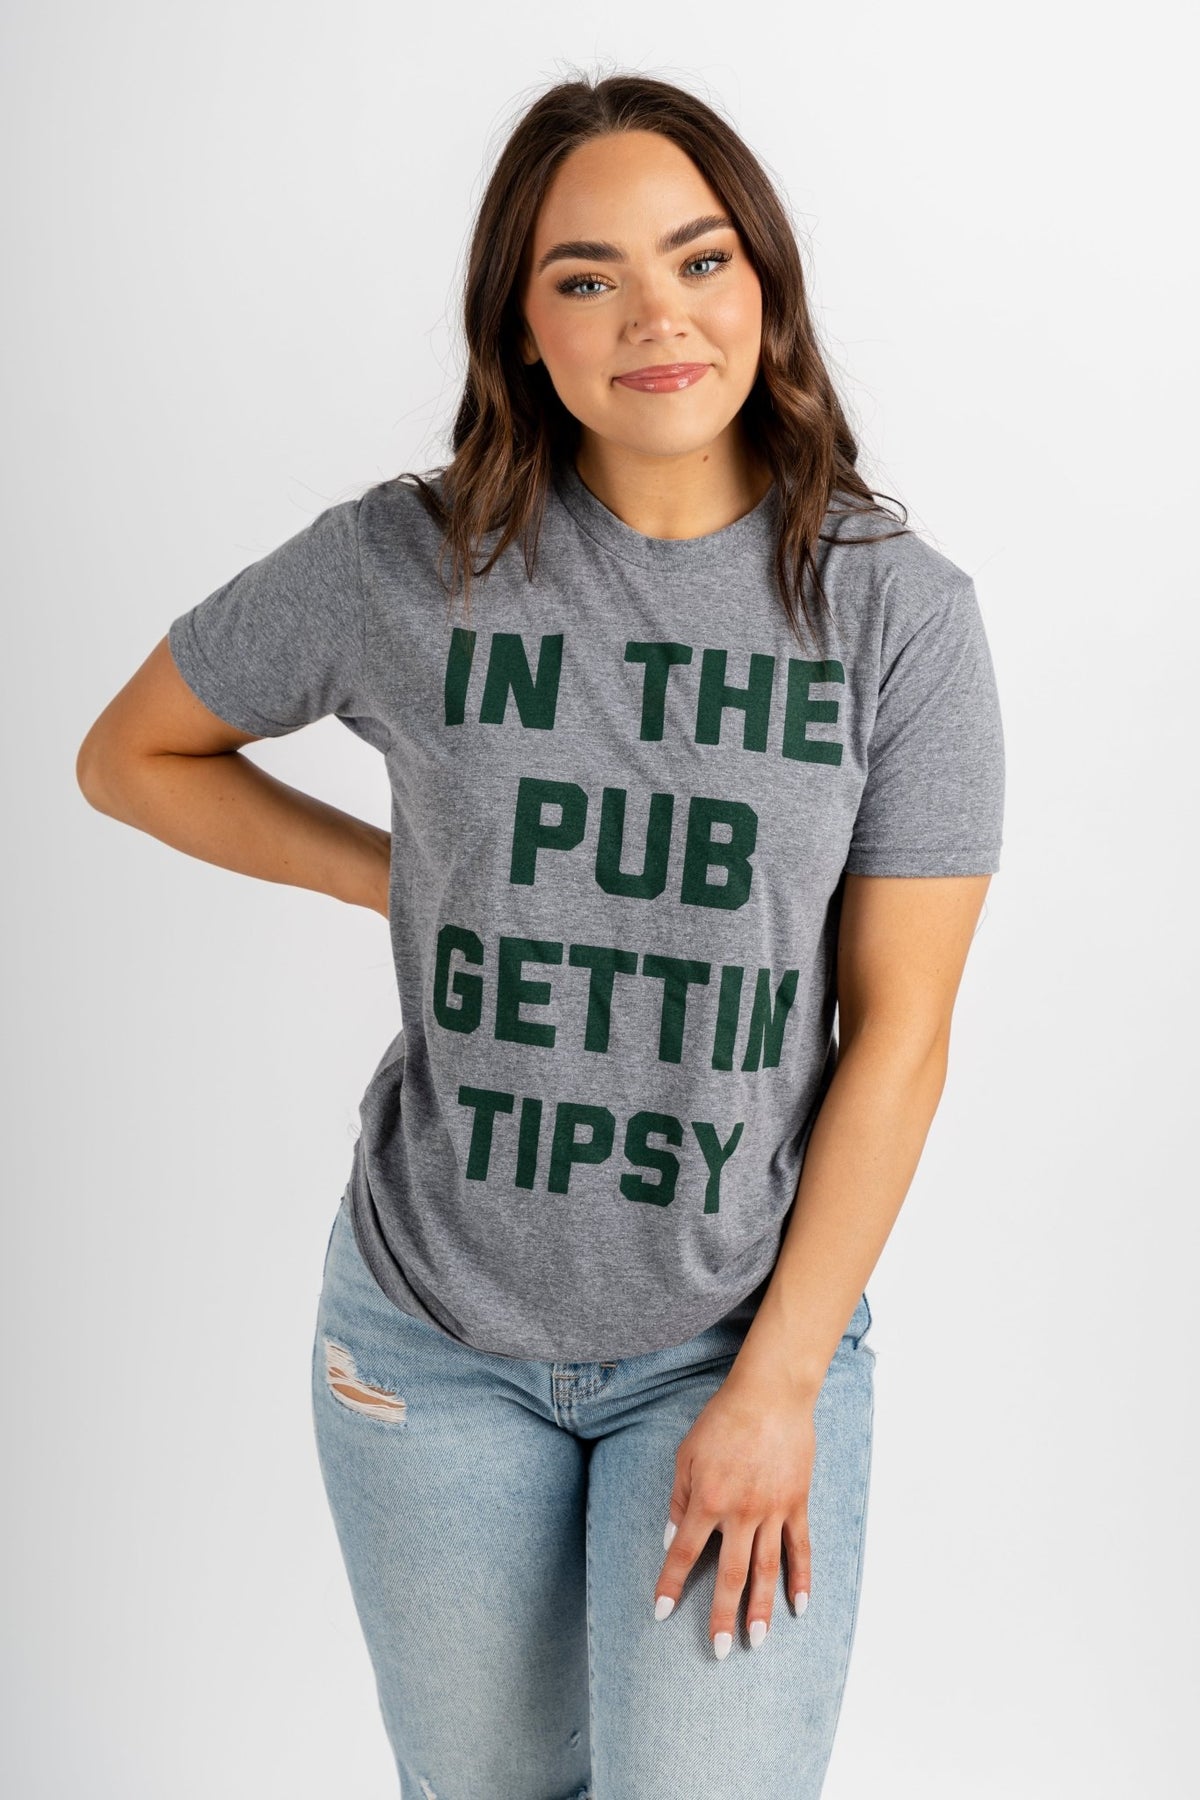 In the pub getting tipsy t-shirt grey - Trendy T-Shirts for St. Patrick's Day at Lush Fashion Lounge Boutique in Oklahoma City